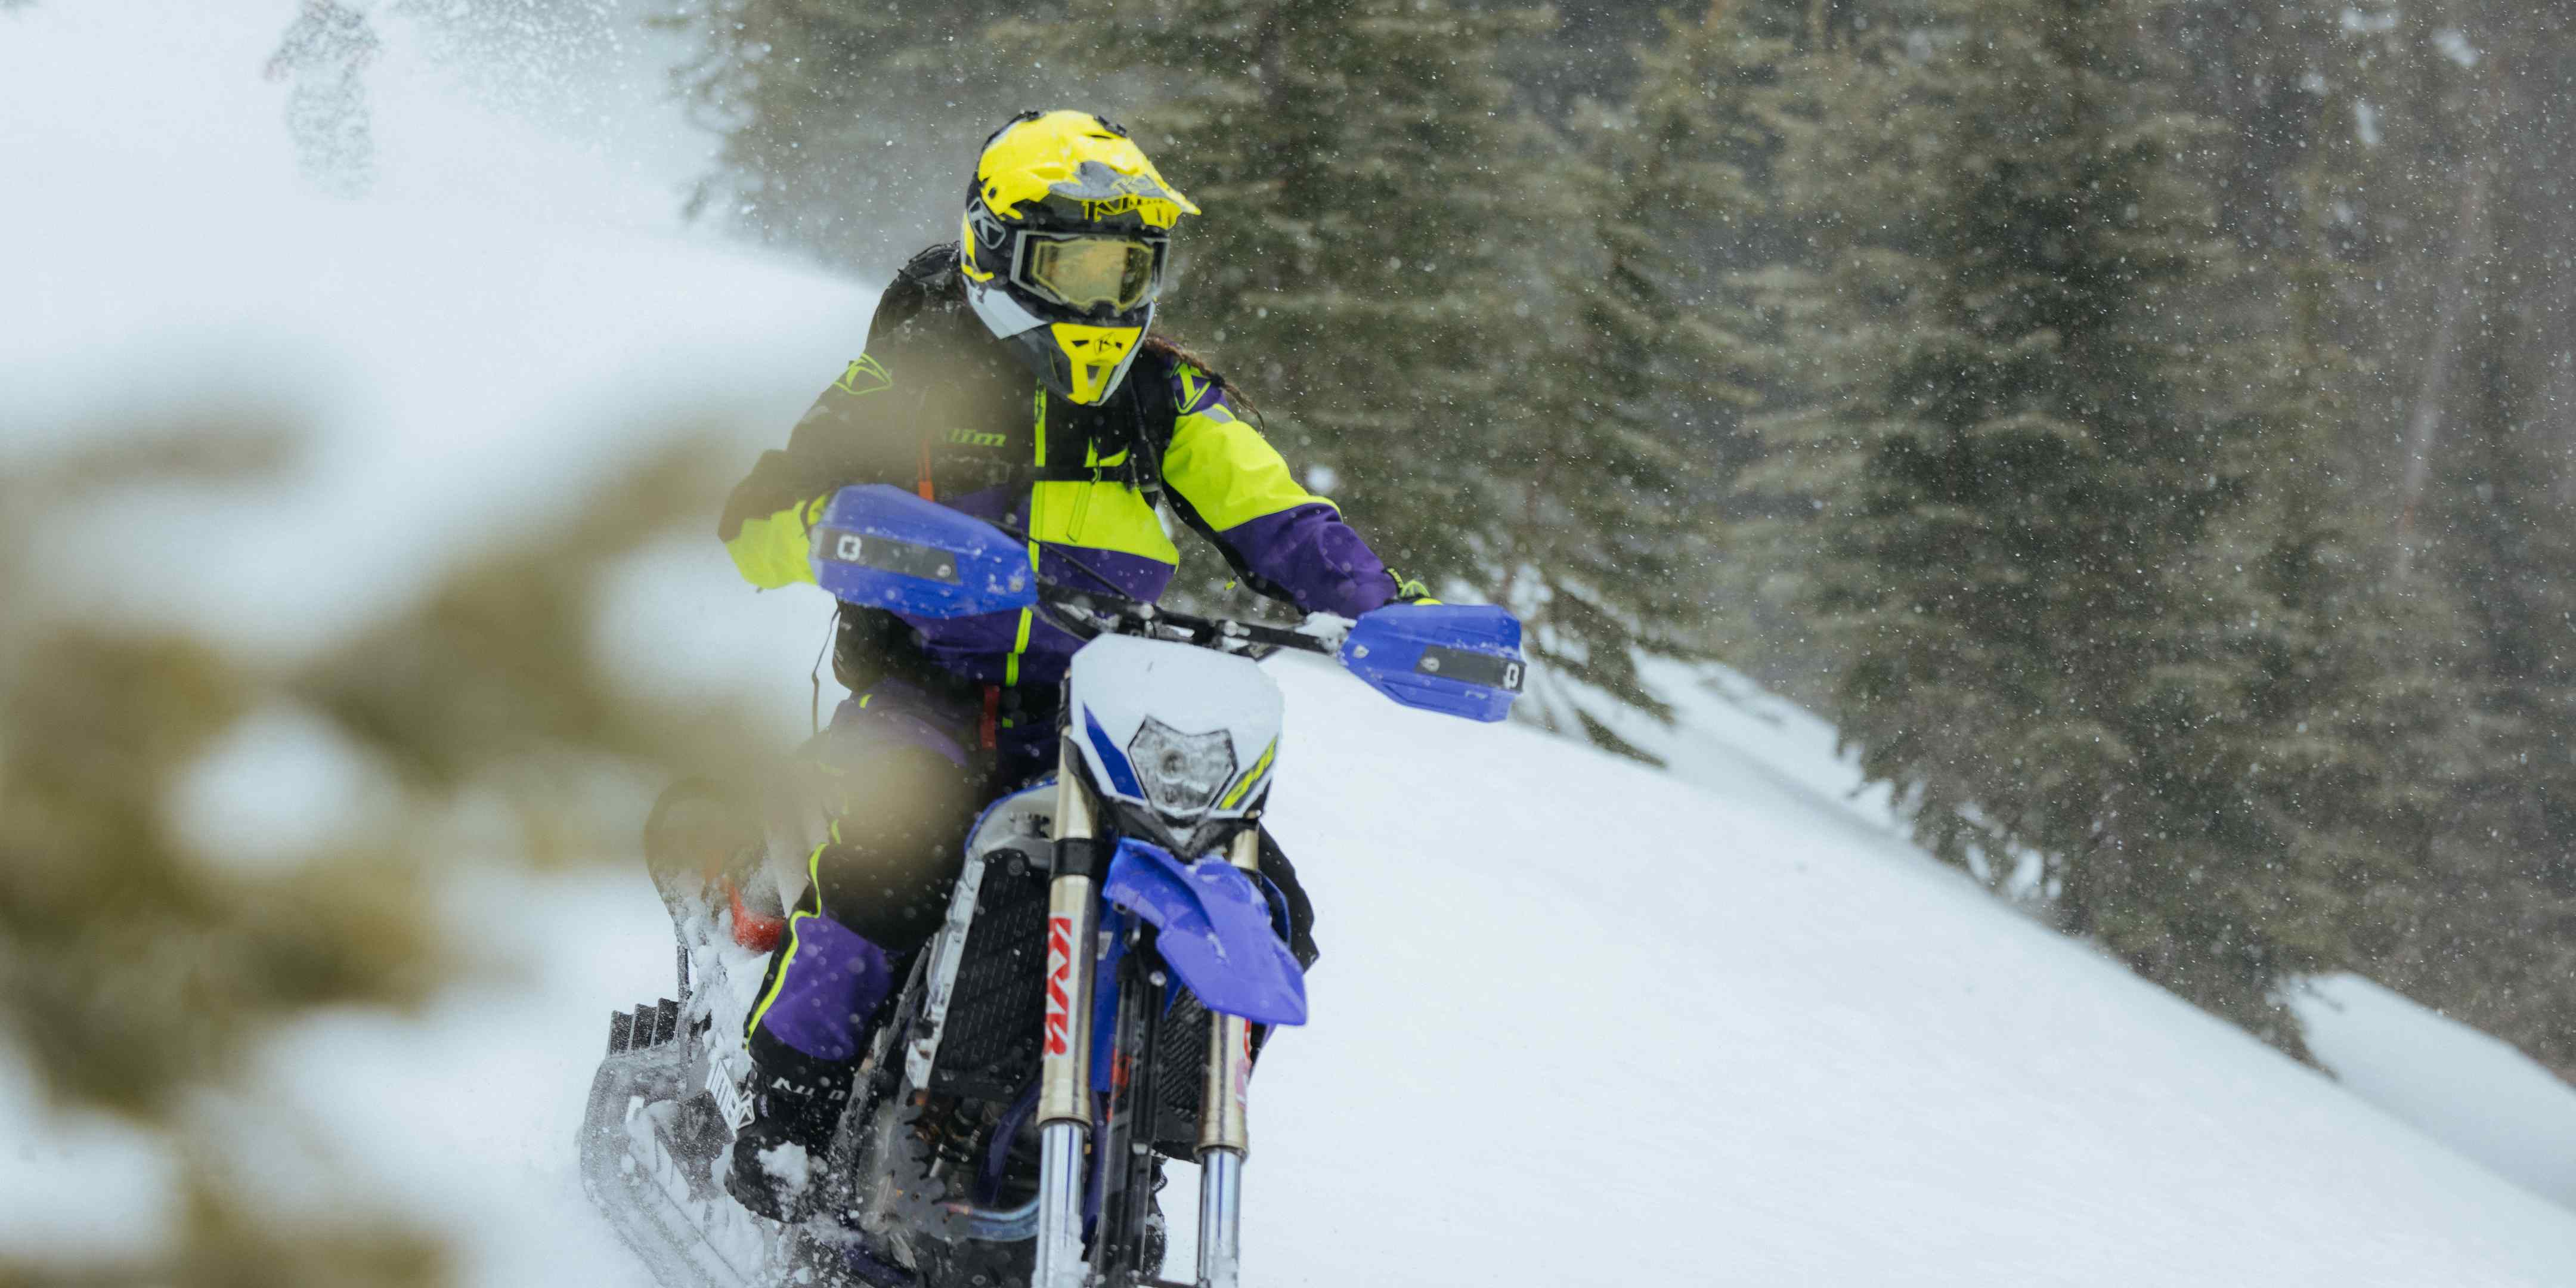 Introducing Babes in the Snow Spring of 2024 - An All Inclusive Snowbike Adventure with Snowbike Nation x Kalispell Montana